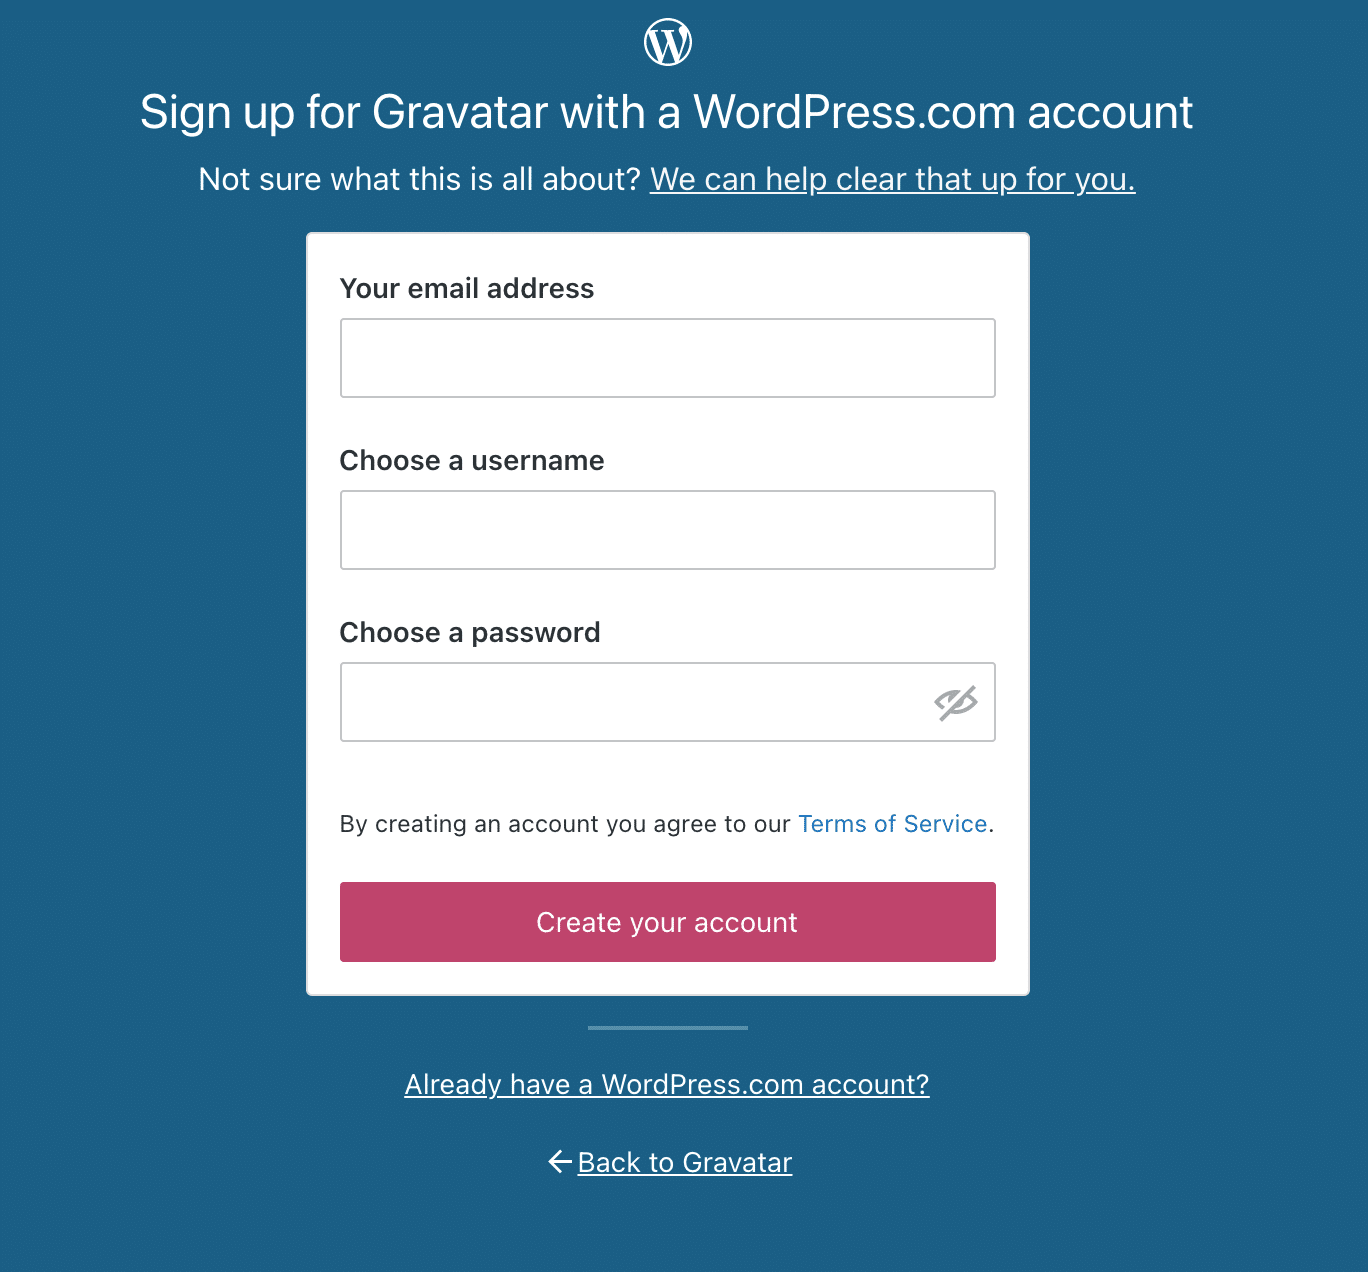 Sign up for Gravatar with a WordPress.com account.